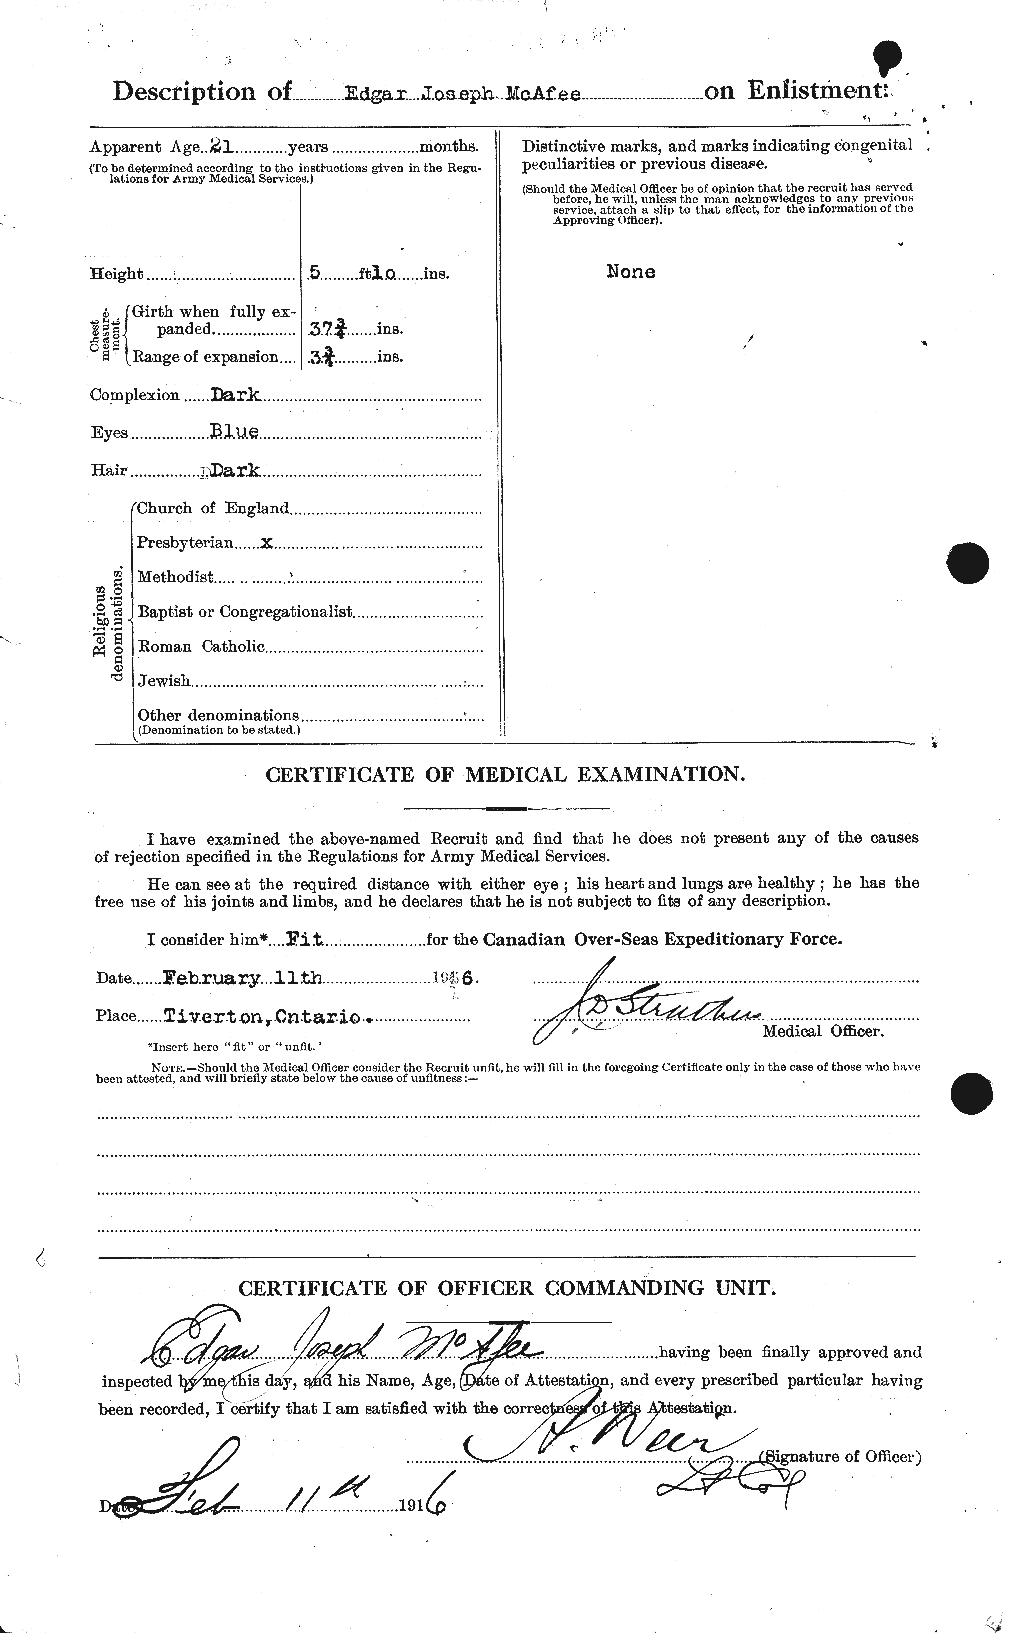 Personnel Records of the First World War - CEF 130198b